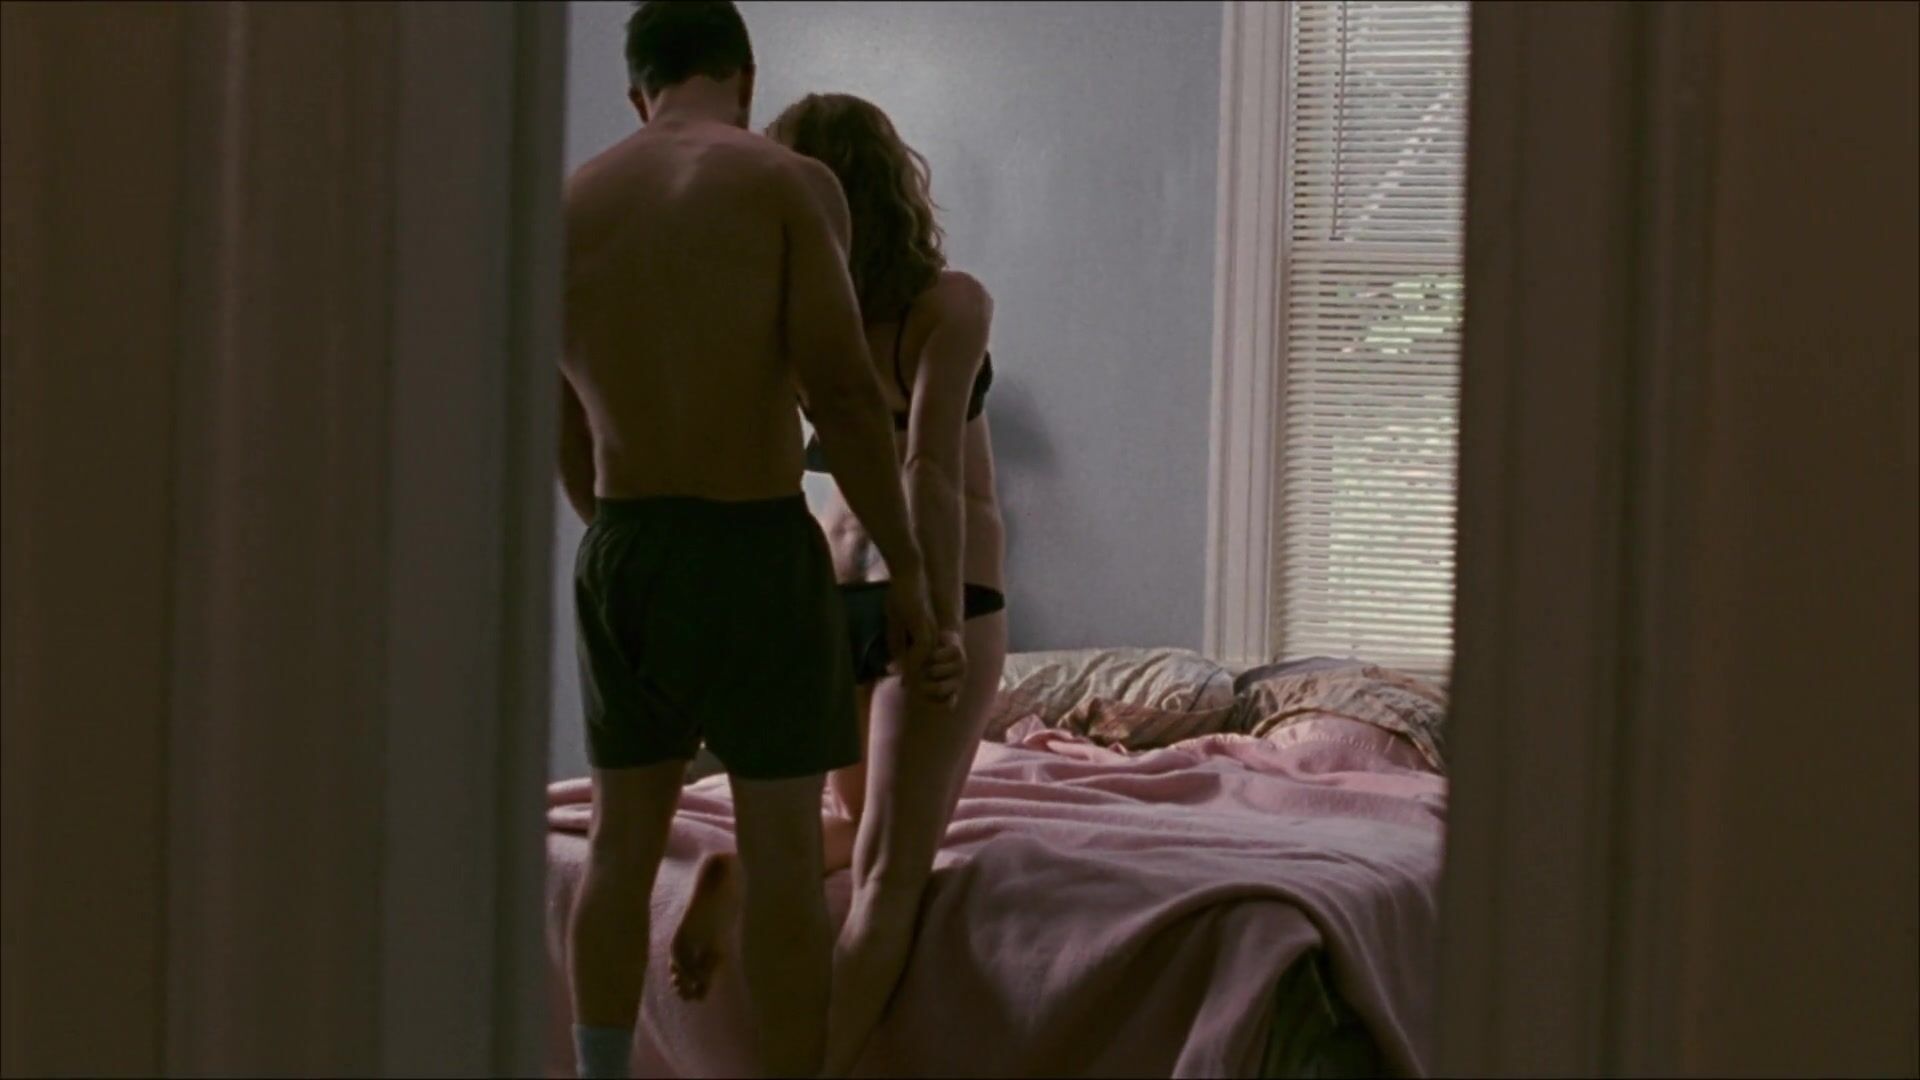 Gayemo Man takes Amy Adams to bed but fails to bonk her in nude scene from The Fighter (2010) Pervs